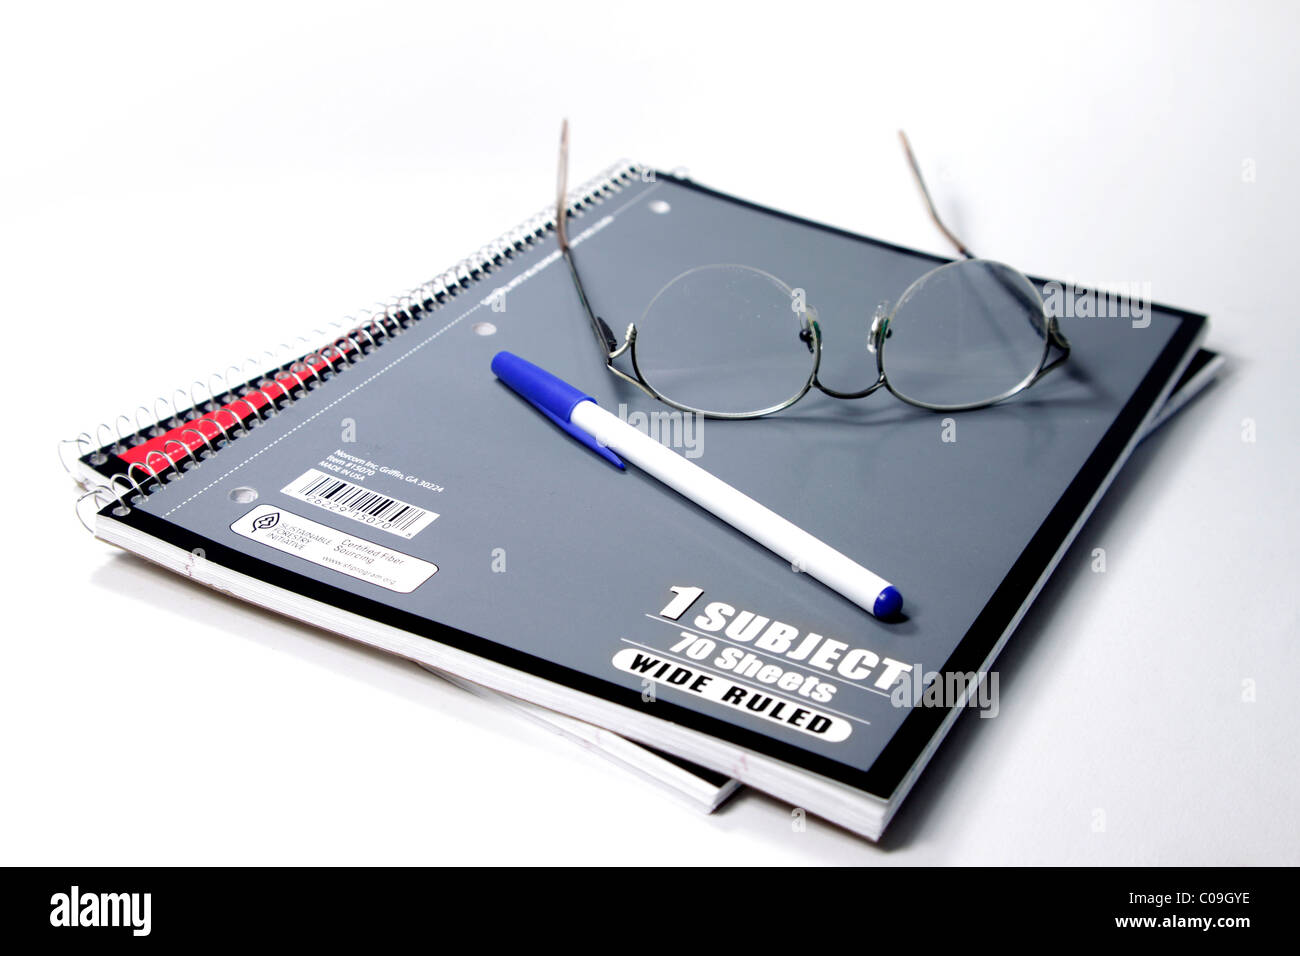 Spiral bound gray and red notebooks with pen and glasses Stock Photo